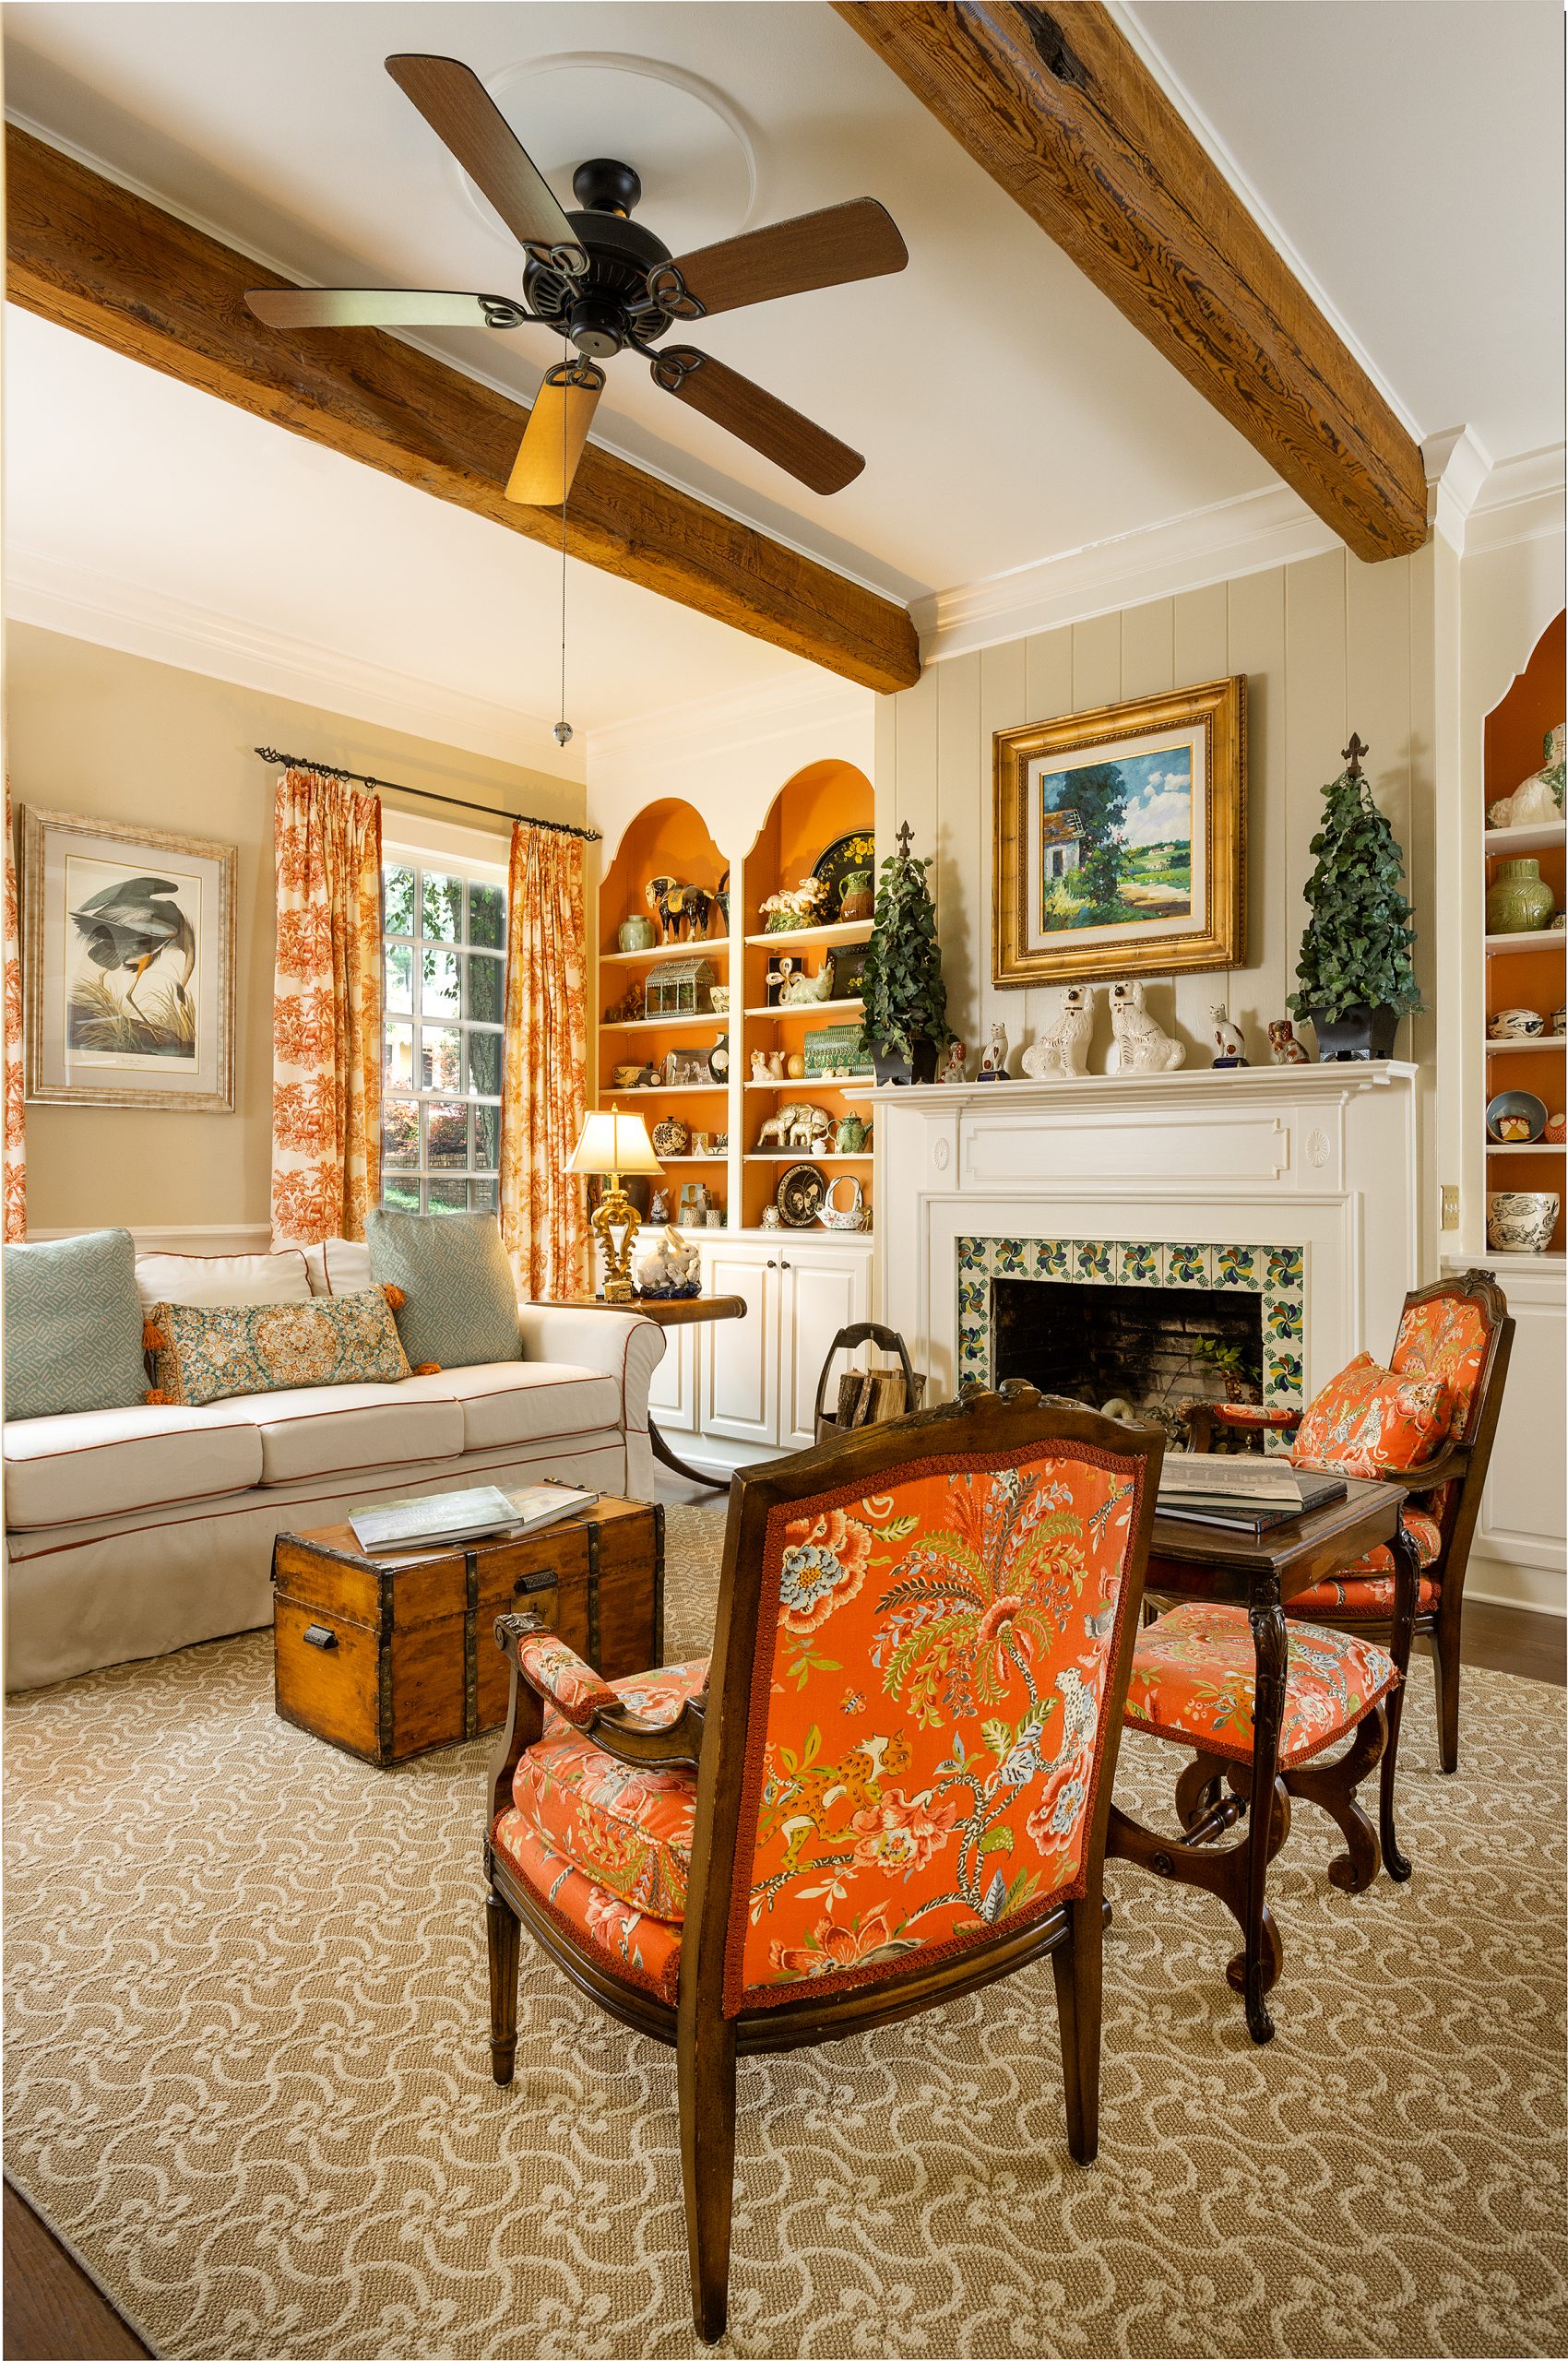 Jill’s favorite room in the house is the “little den,” accented by antique ceiling beams. Beautiful fabrics make the room cozy around a fireplace surrounded in Italian tile and flanked by bookshelves. Jill’s extensive pottery and figurine collection is highlighted by the shelves being painted a rust accent as a backdrop. An antique stagecoach trunk is used as a coffee table.